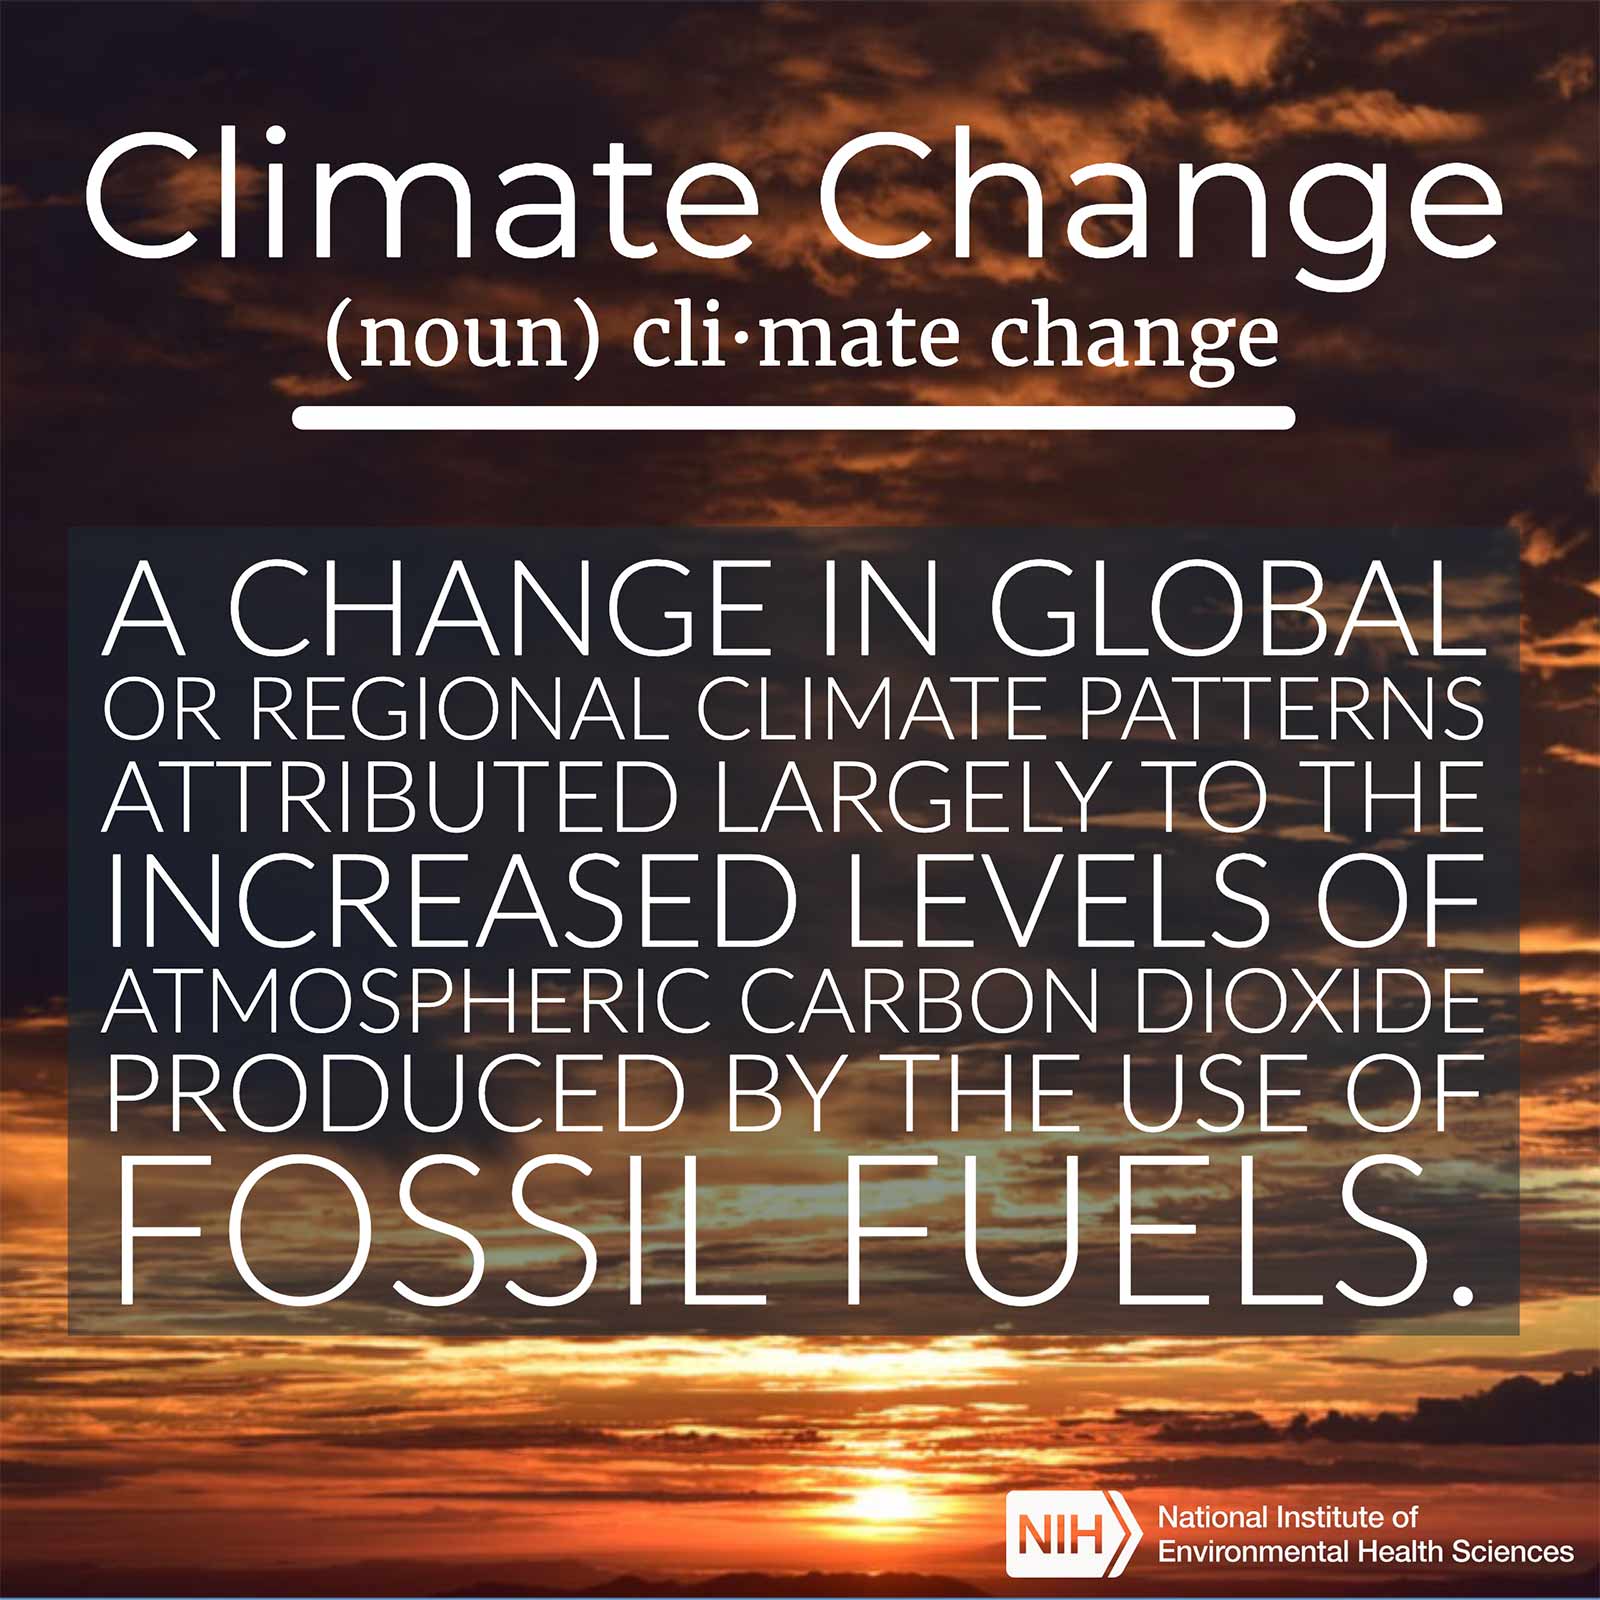 Climate change (noun) defined as 'A change in global or regional climate patterns attributed largely to the increased levels of atmospheric carbon dioxide produced by the use of fossil fuels'